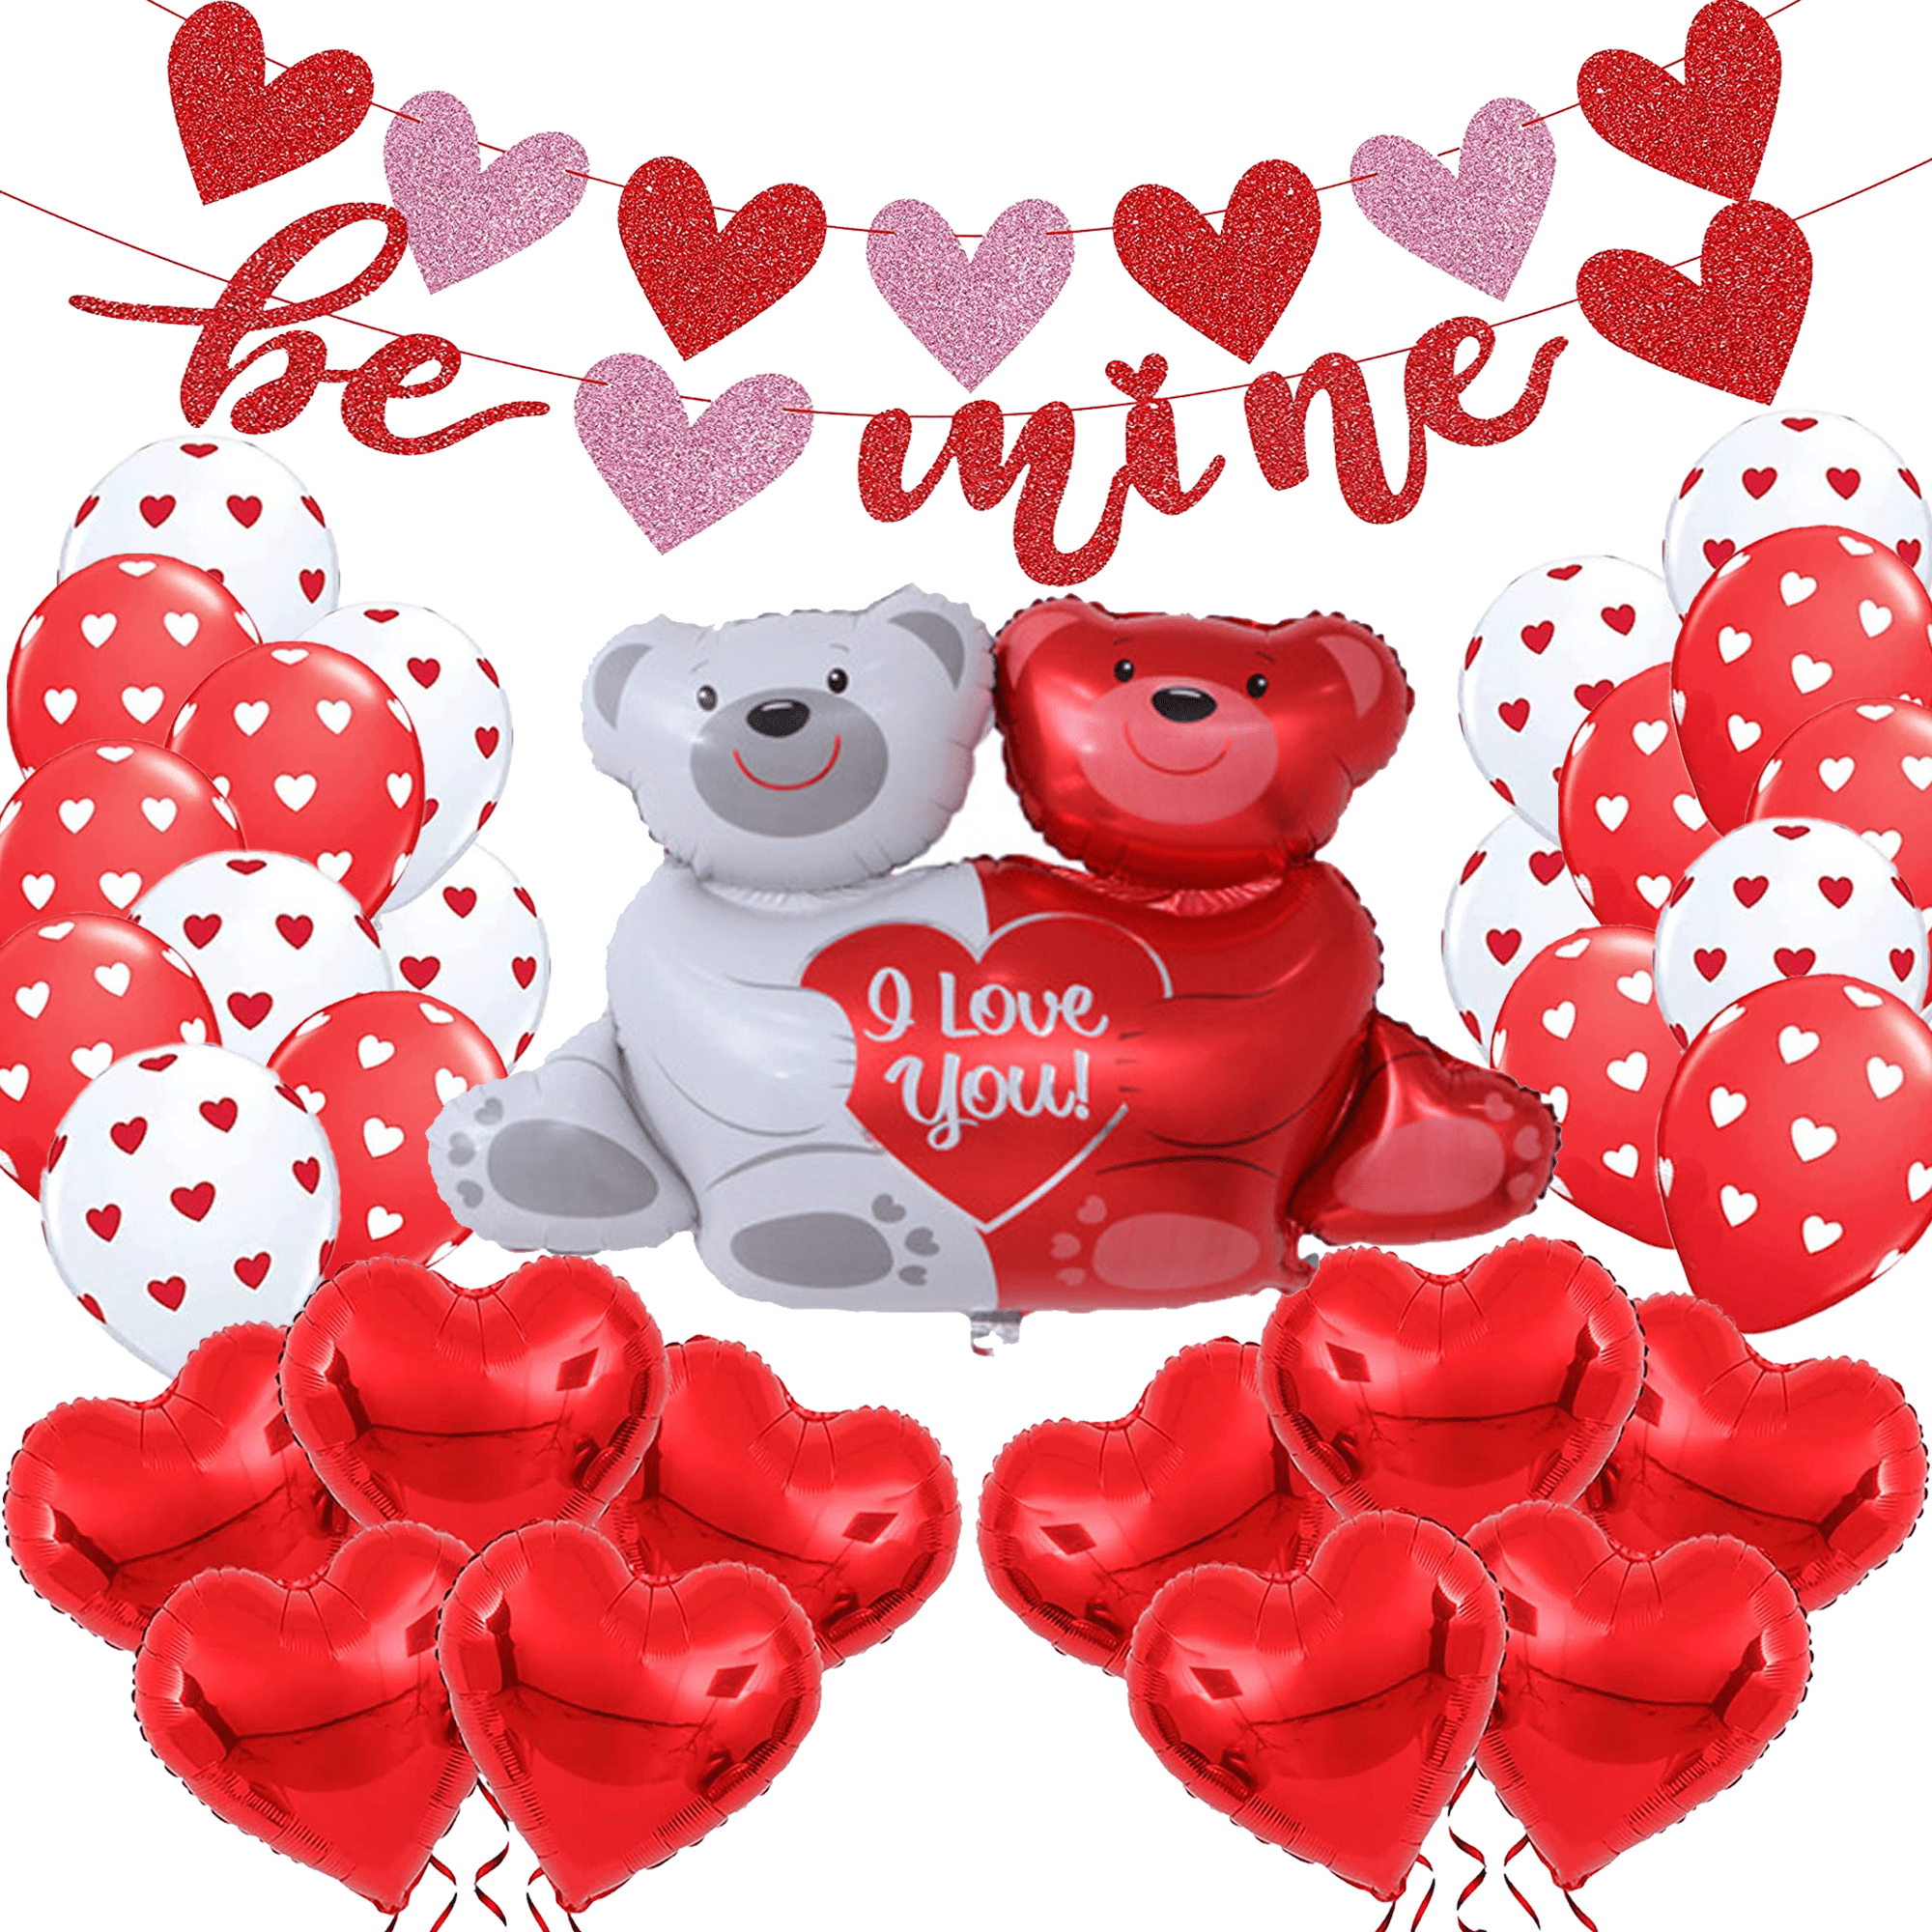 Red Heart Balloons Set, 33 Pack Balloons Set with Be Mine Banner Love Bear I Love You Balloons for Romantic Decorations Special Night Wedding Party Proposal Decorations